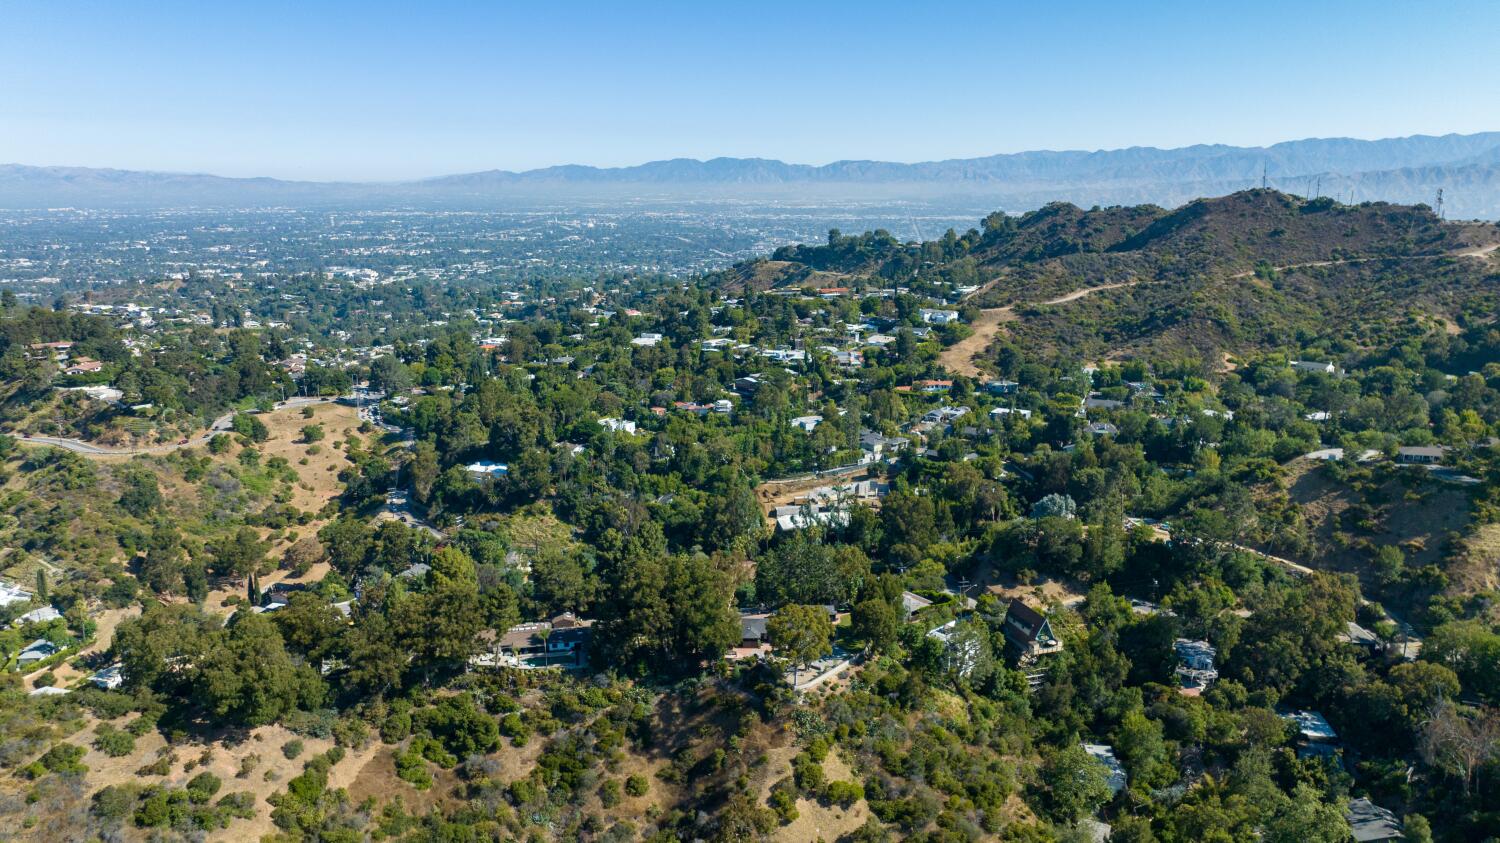 L.A. looks to tighten rules for single-family homes in part of Santa Monica Mountains